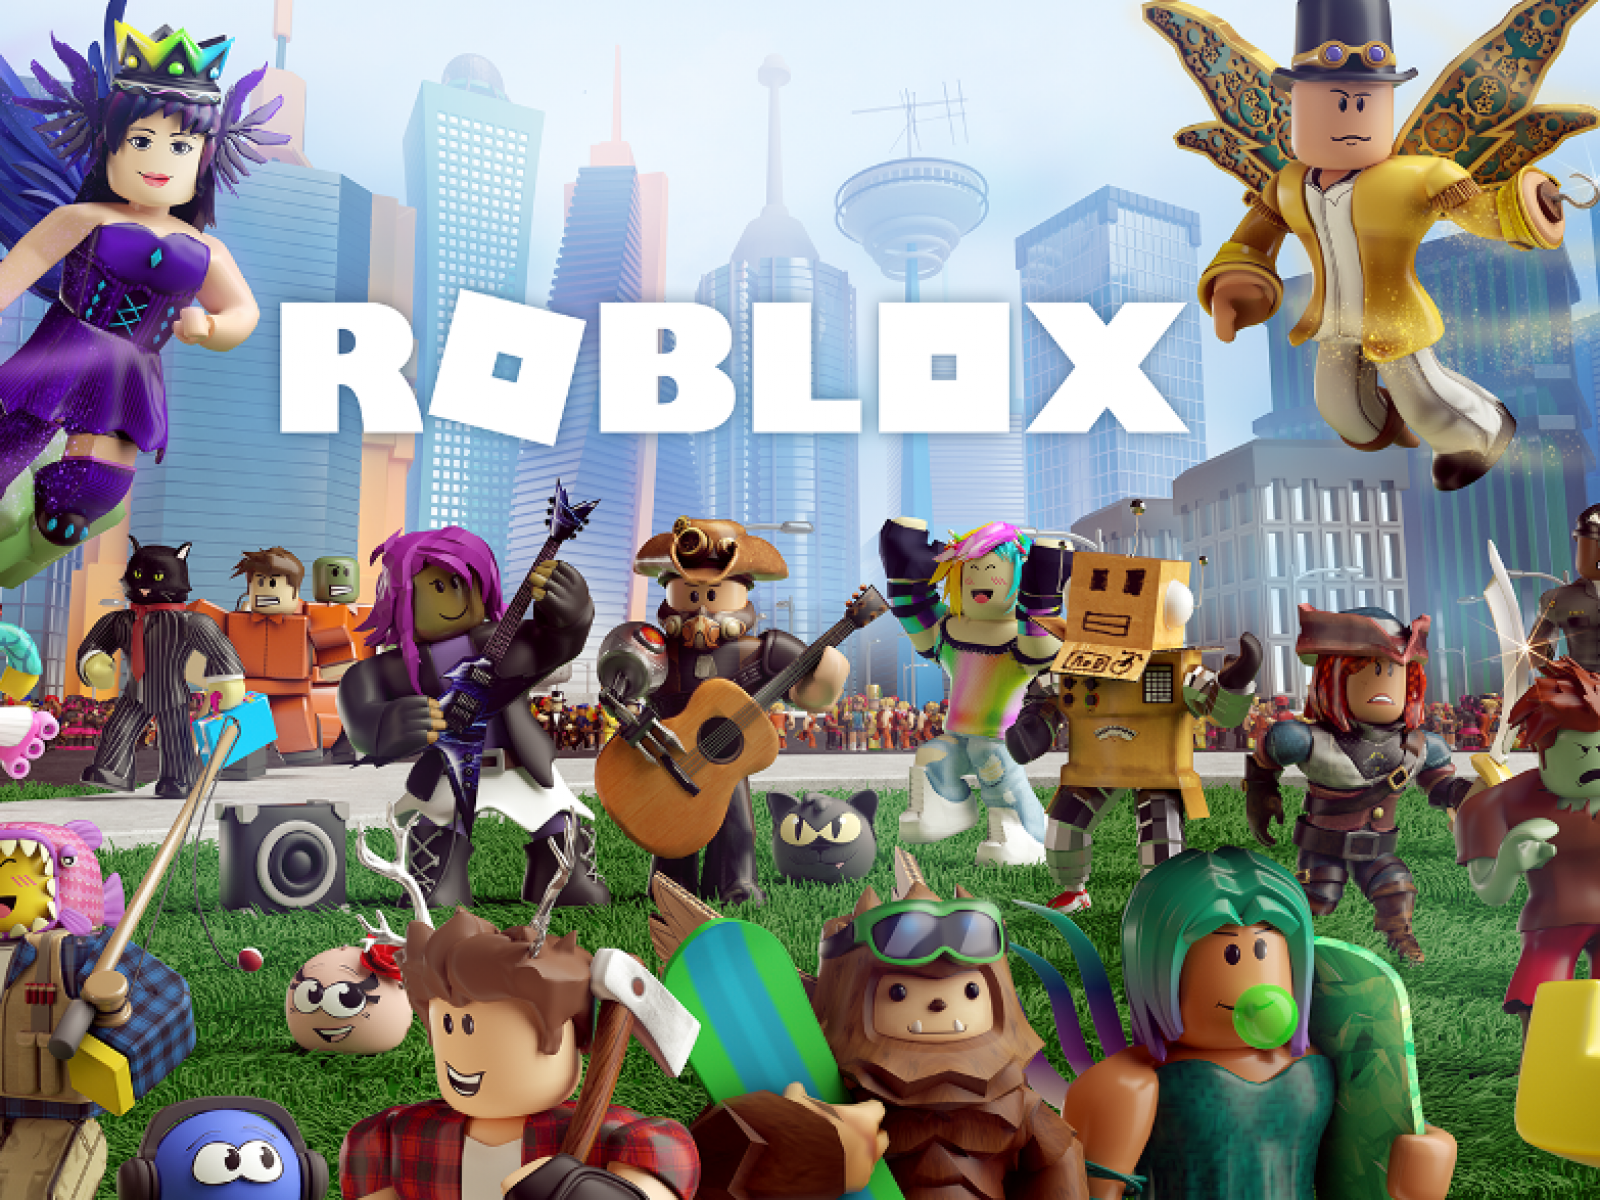 What is the Roblox?